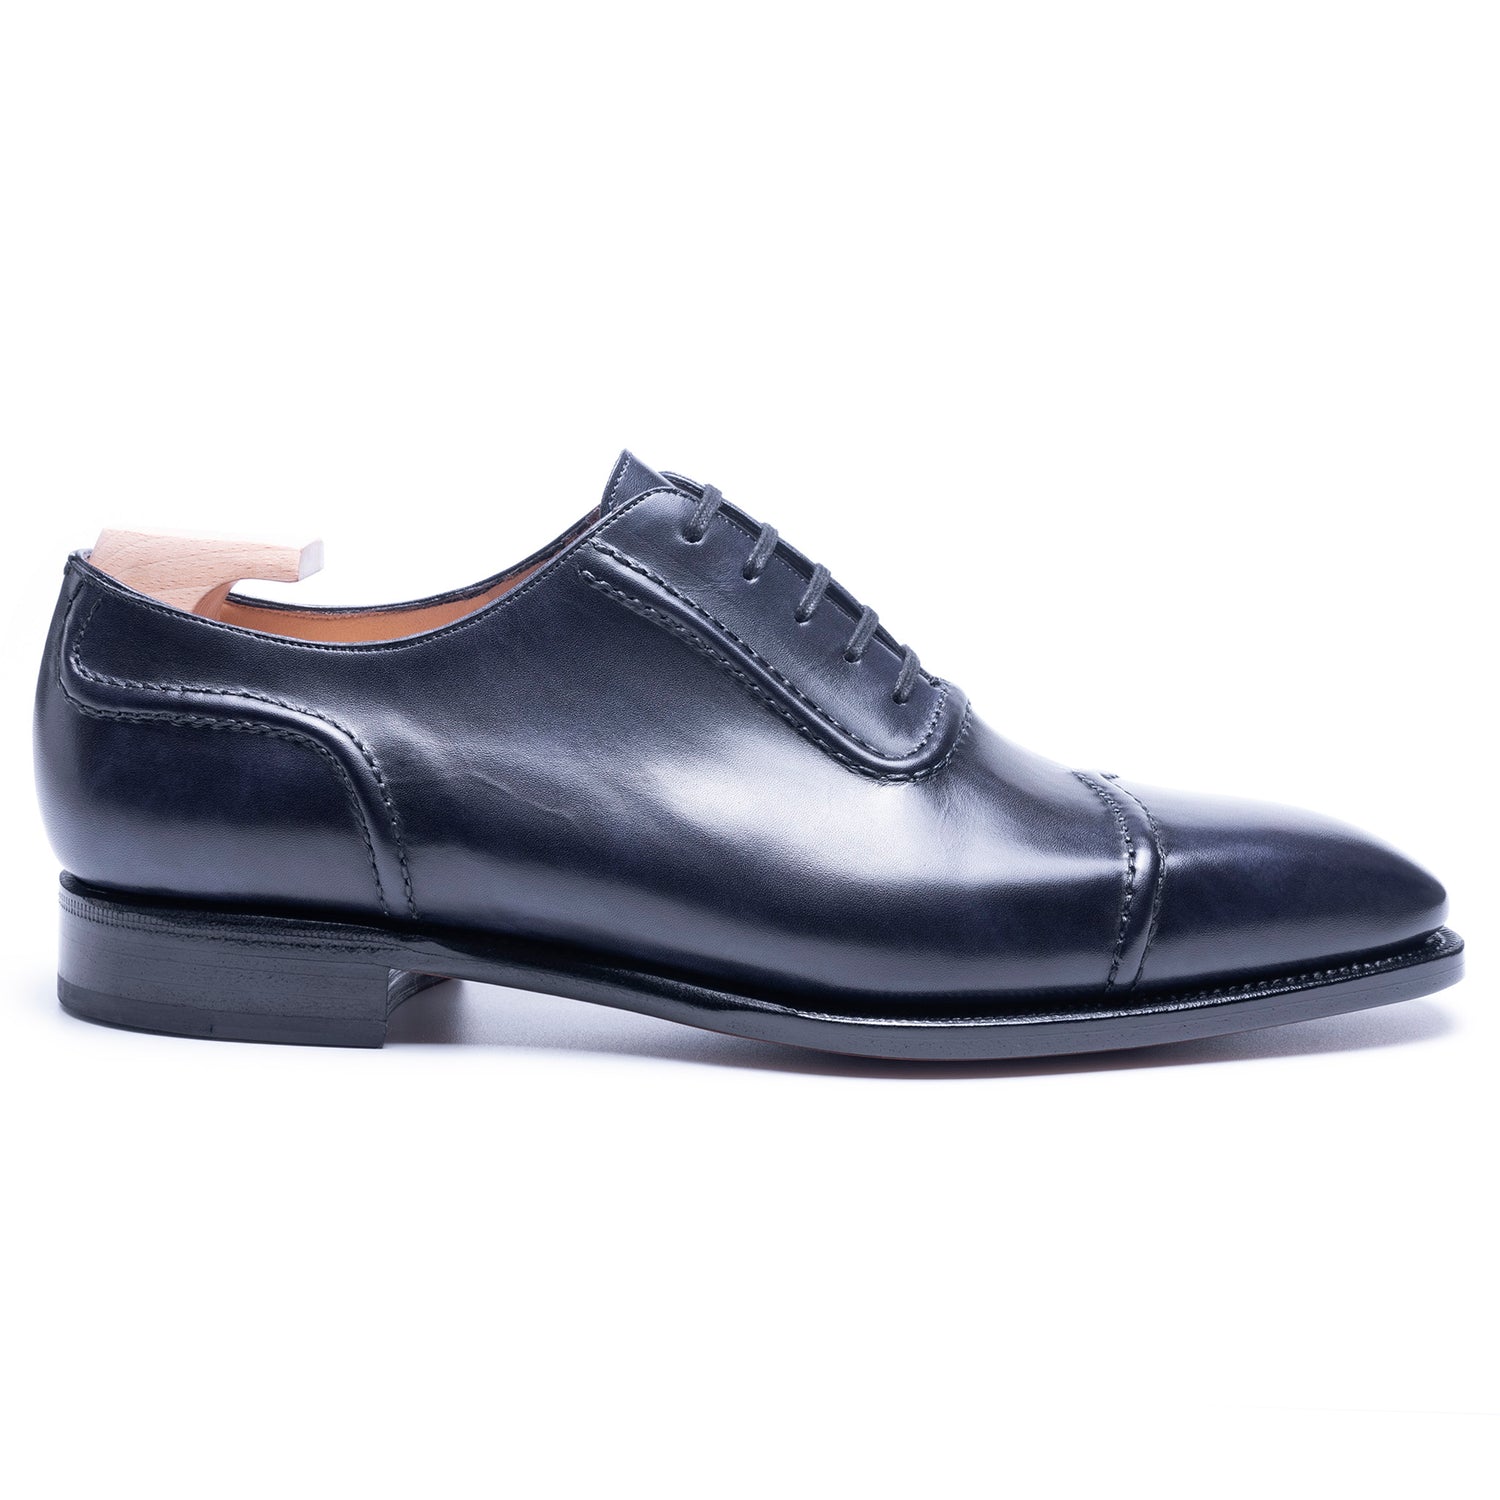 TLB Mallorca leather shoes 218 / PICASSO / VEGANO NAVY